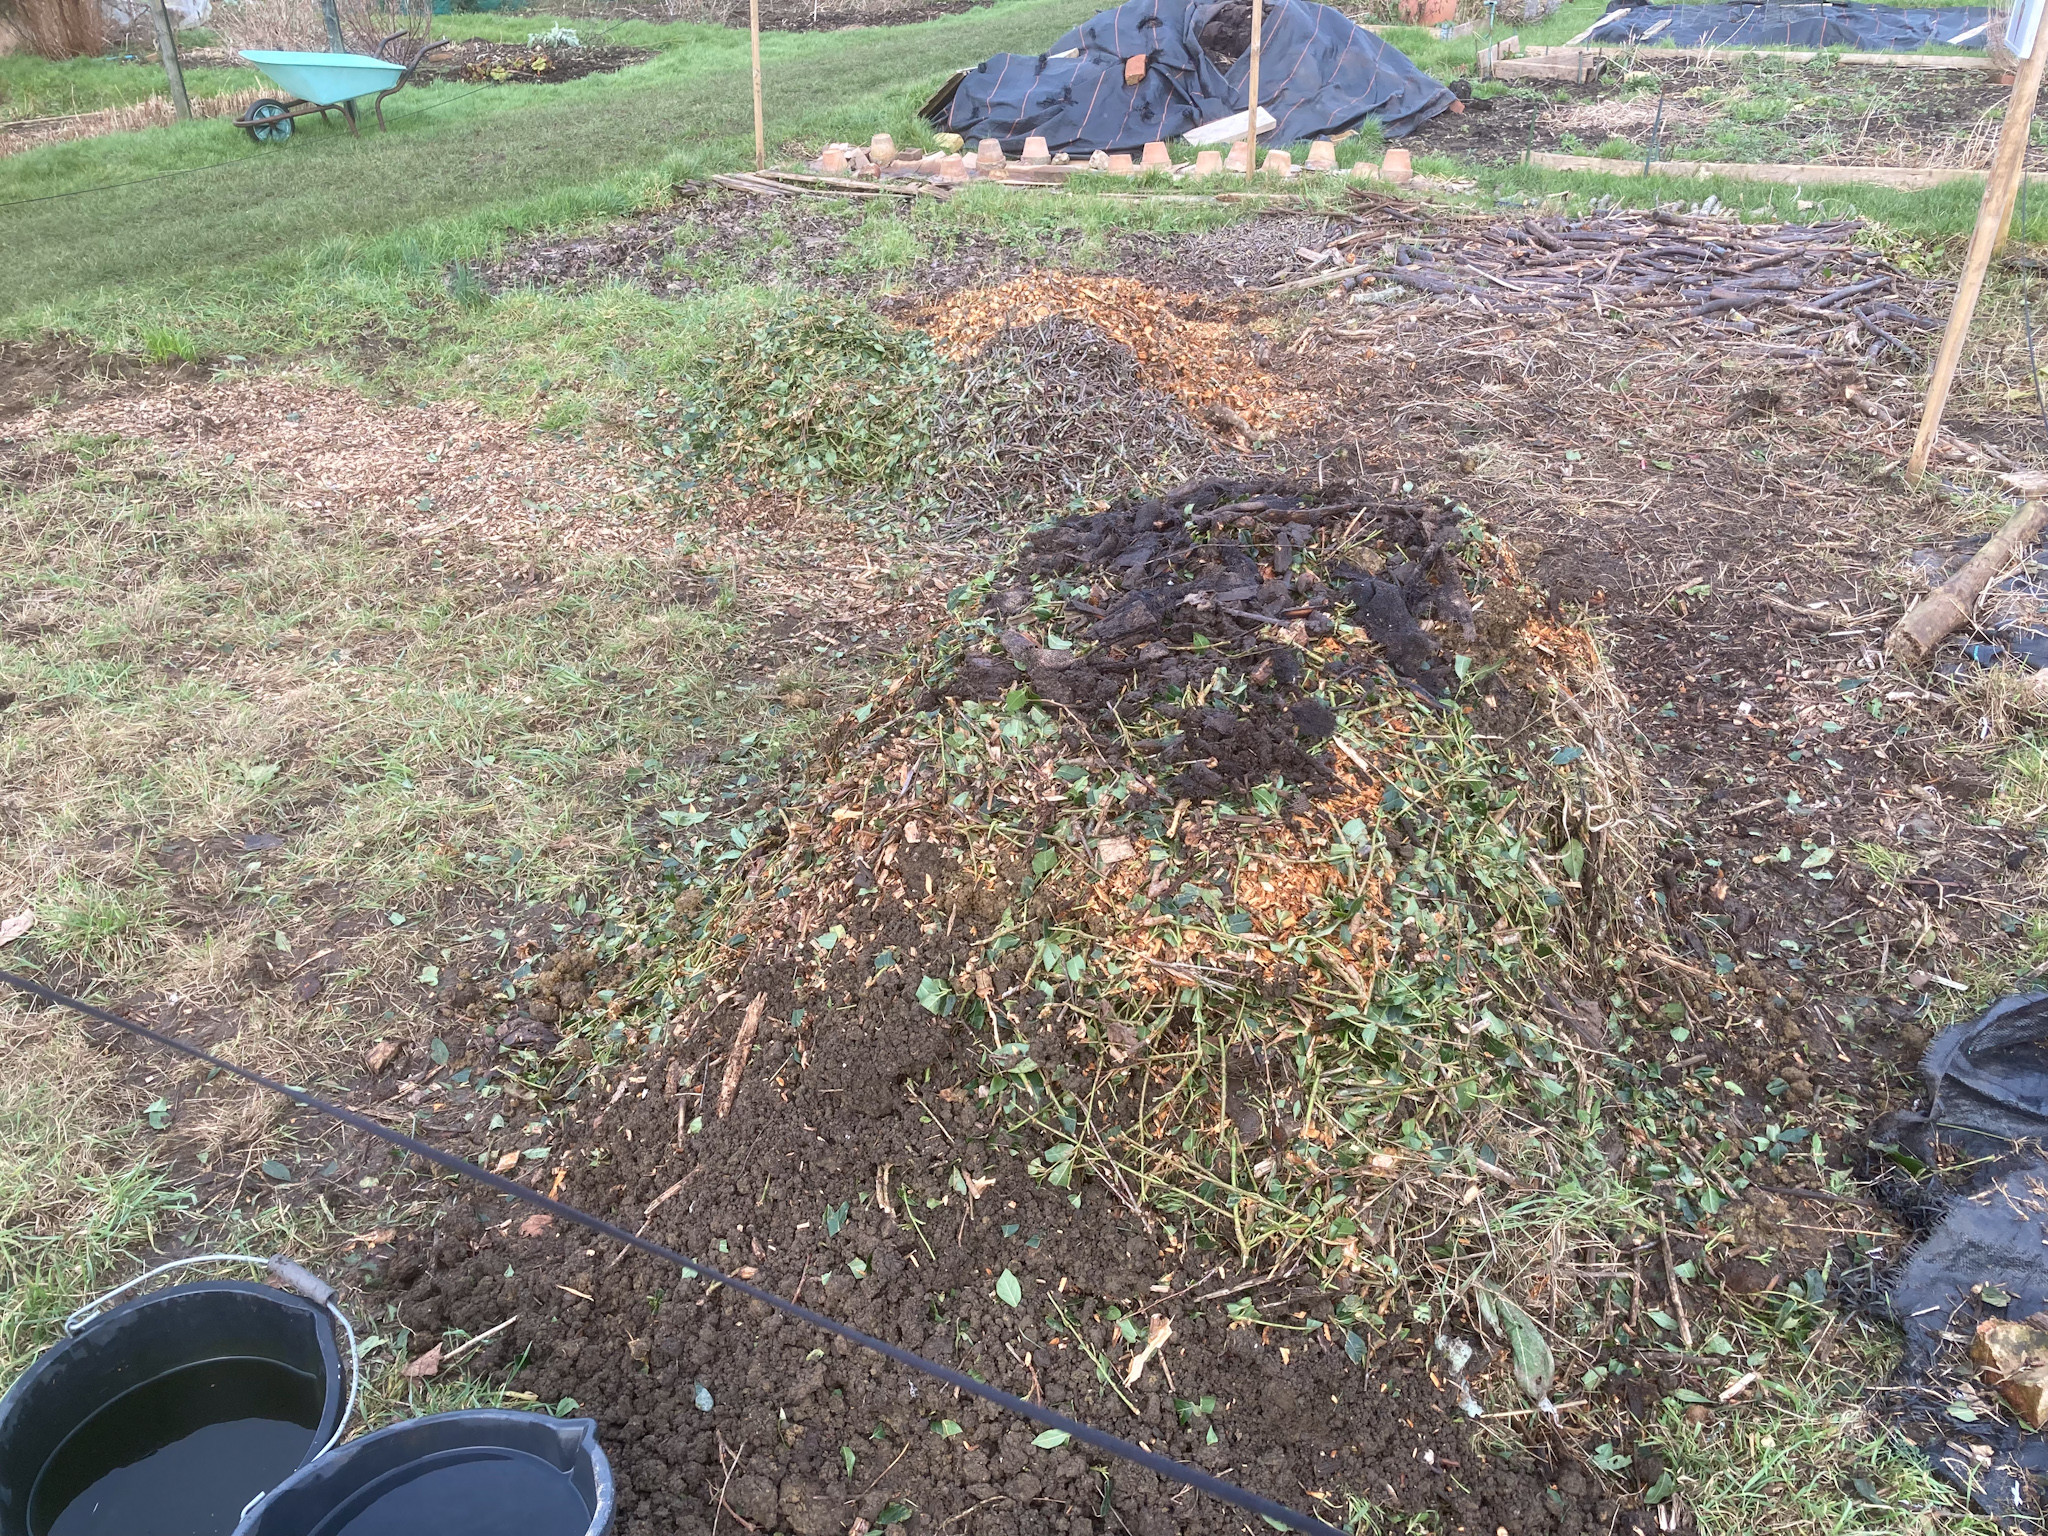 View of the compost plot from the back corner. The compost pile is directly in front. Two buckets of rainwater are ready for keeping the next layer of compostable material moist. The water supply to the site is not switched on until March. Various mulch materials cover the plot, from grass cover to wood chip, leaf litter and small hazel branches.